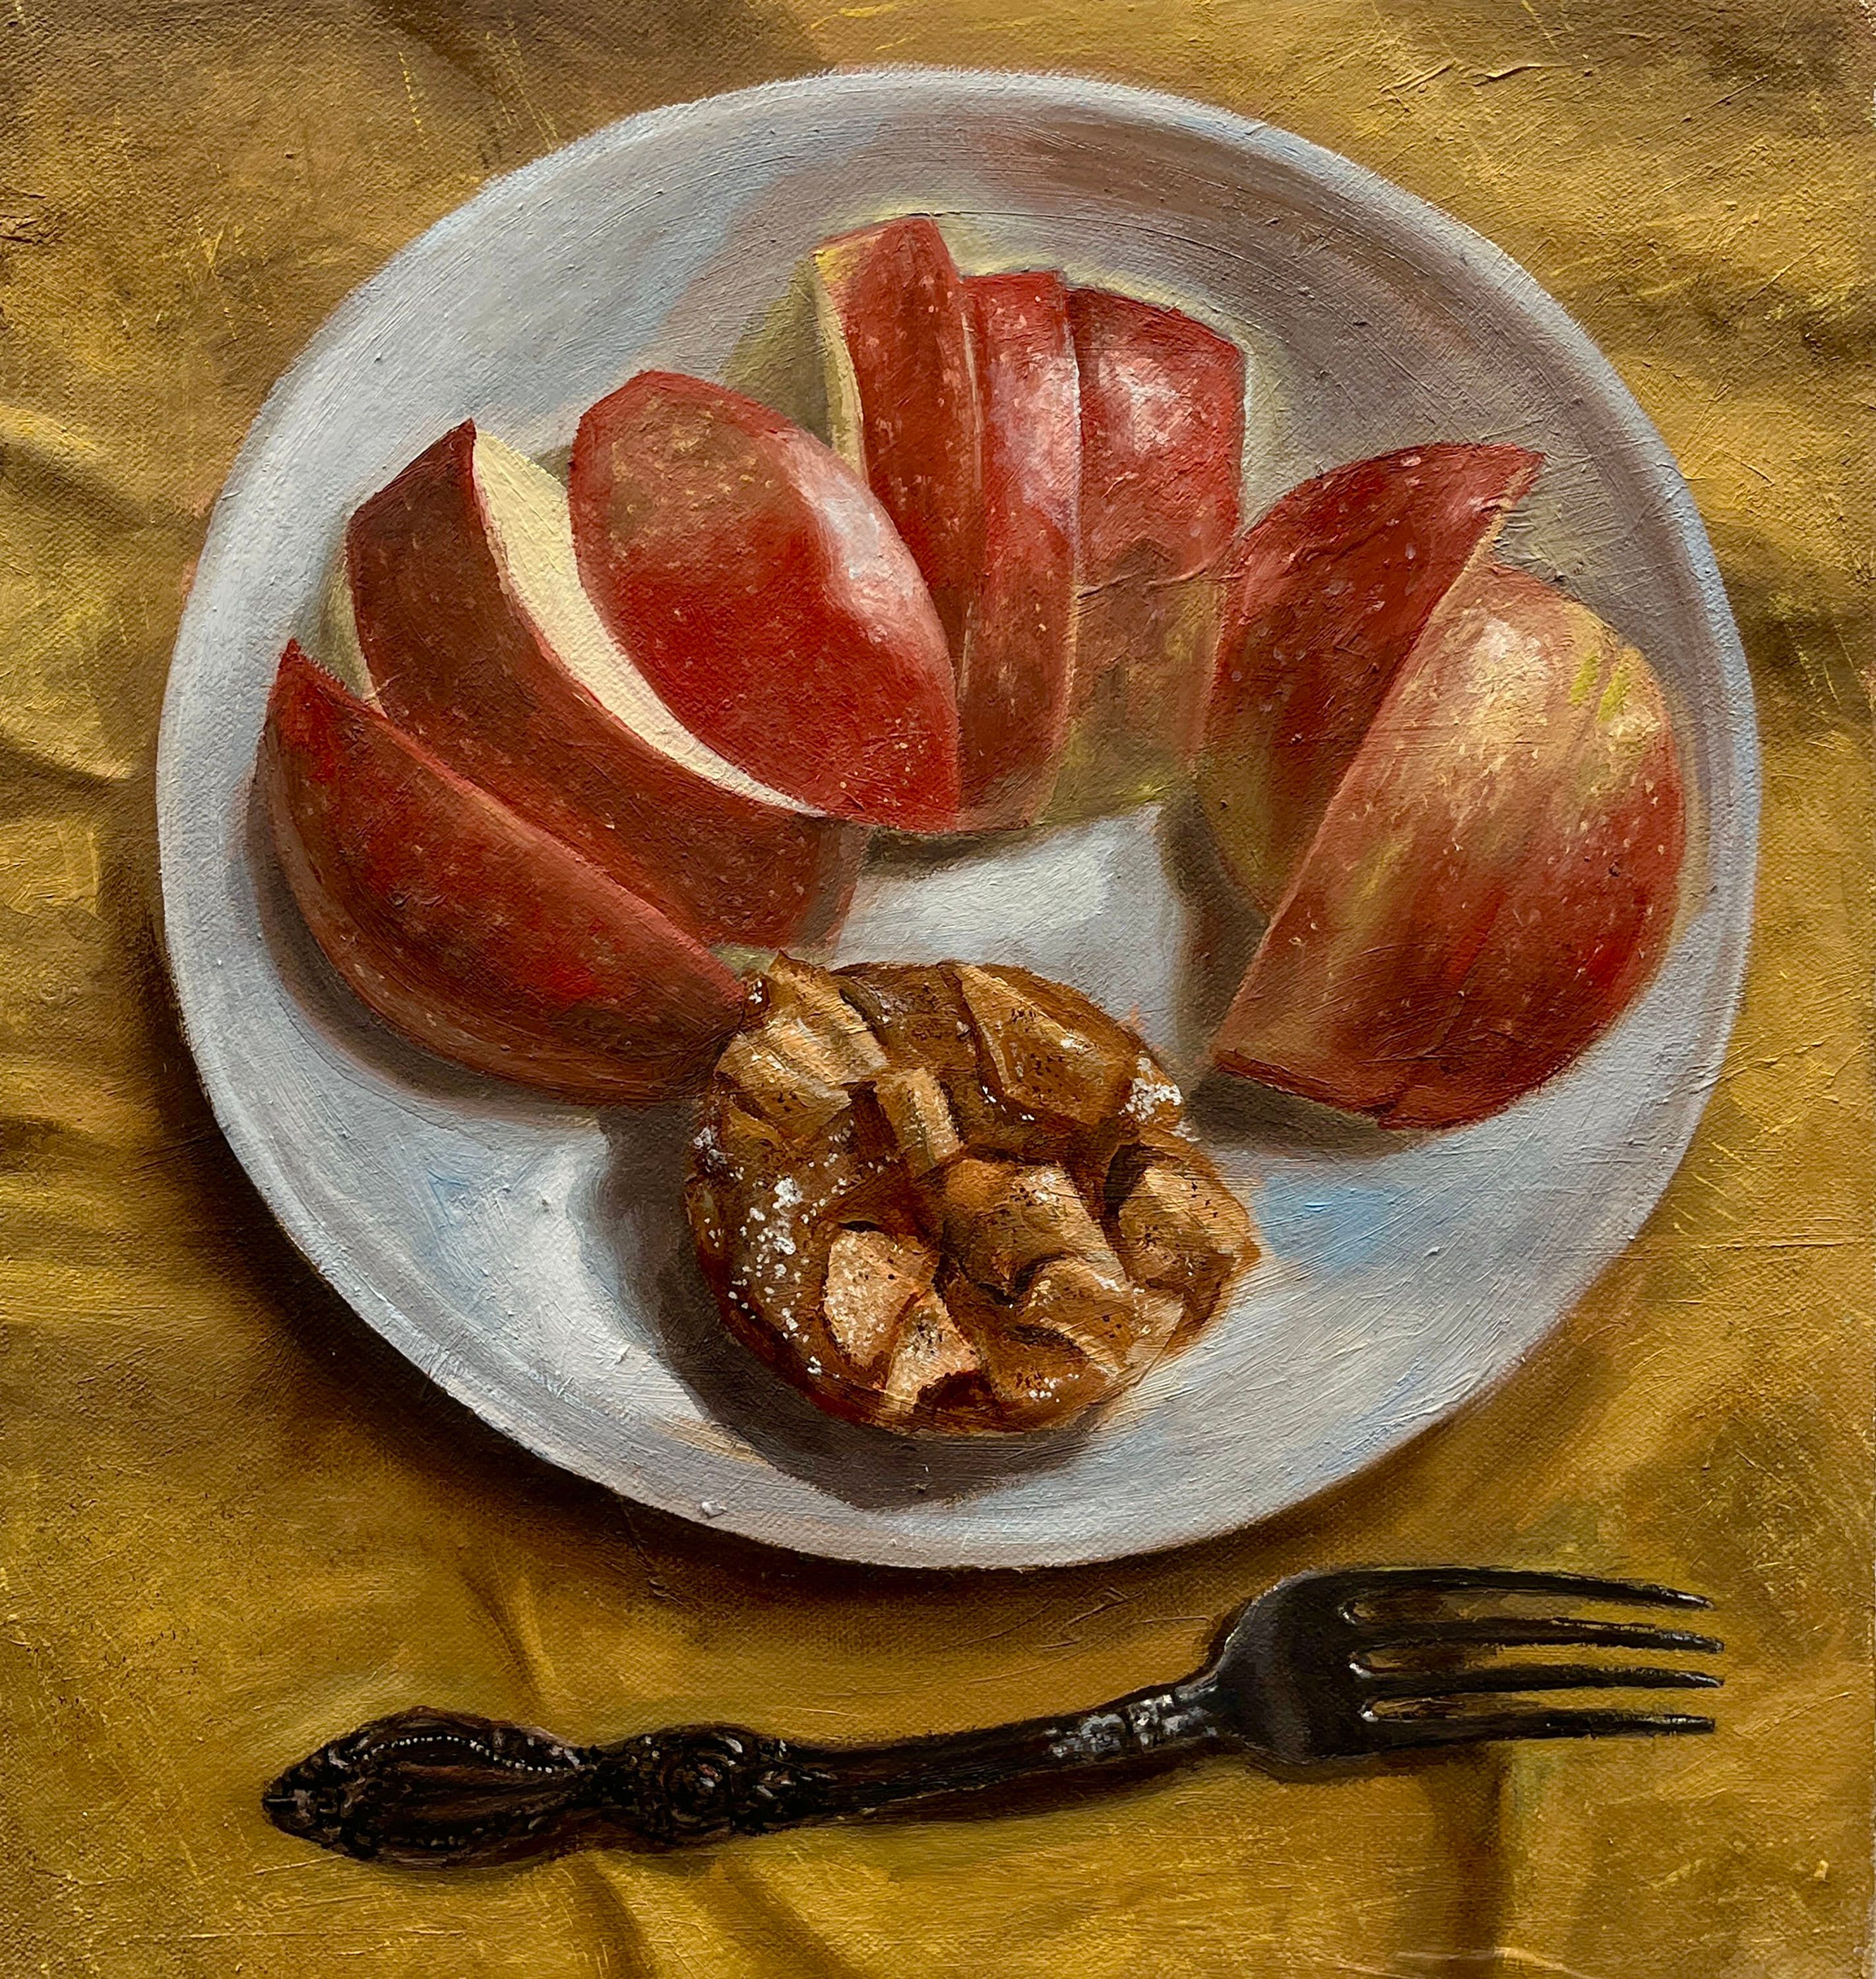 A painting of a white plate with warm apples and an apple pastry on a yellow tablecloth.